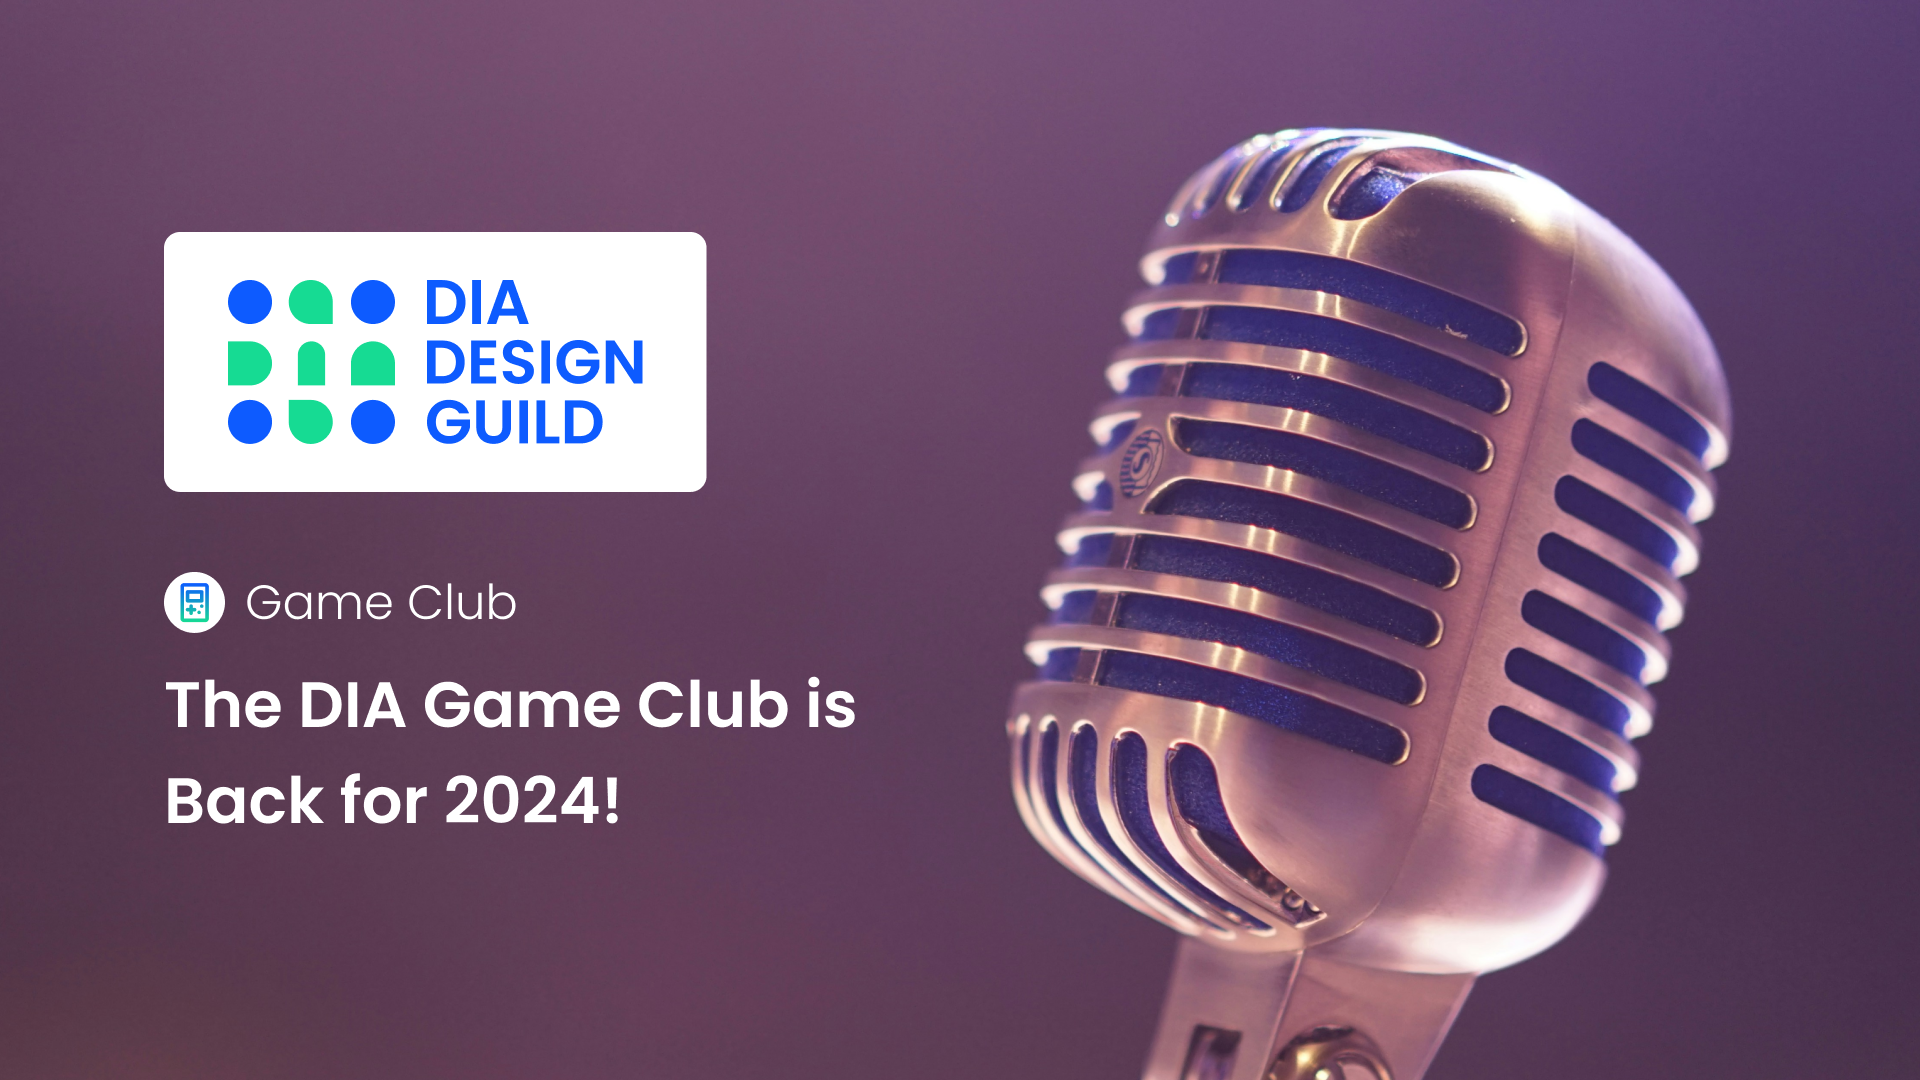 The DIA Game Club is Back for 2024!